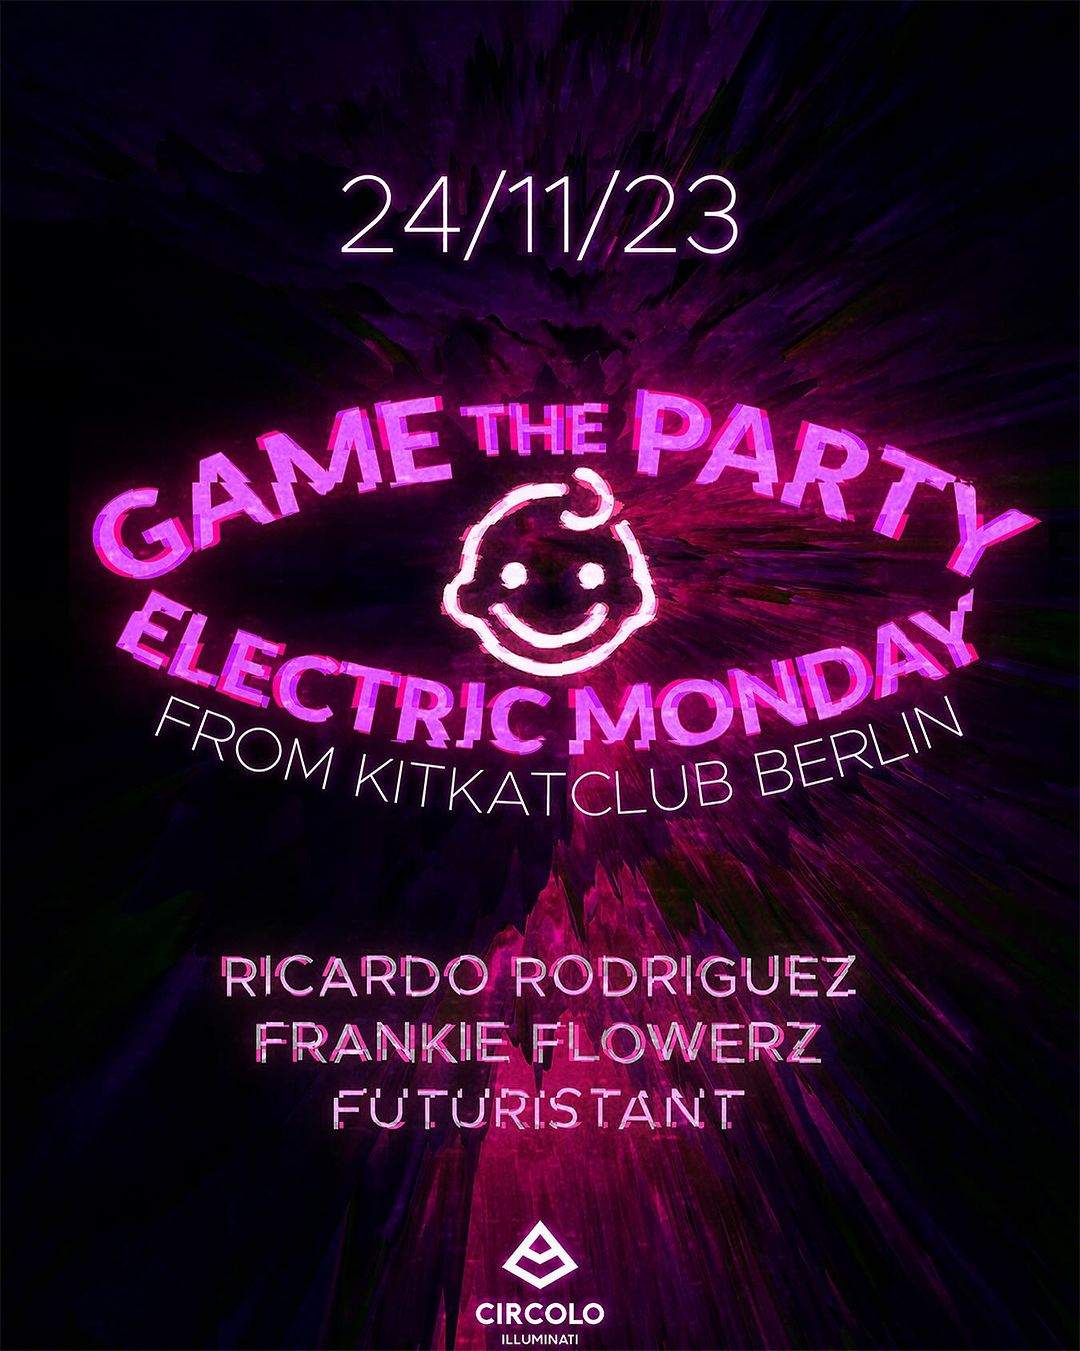 GAME THE PARTY X ELECTRIC MONDAY BY KIT KAT BERLIN - フライヤー表